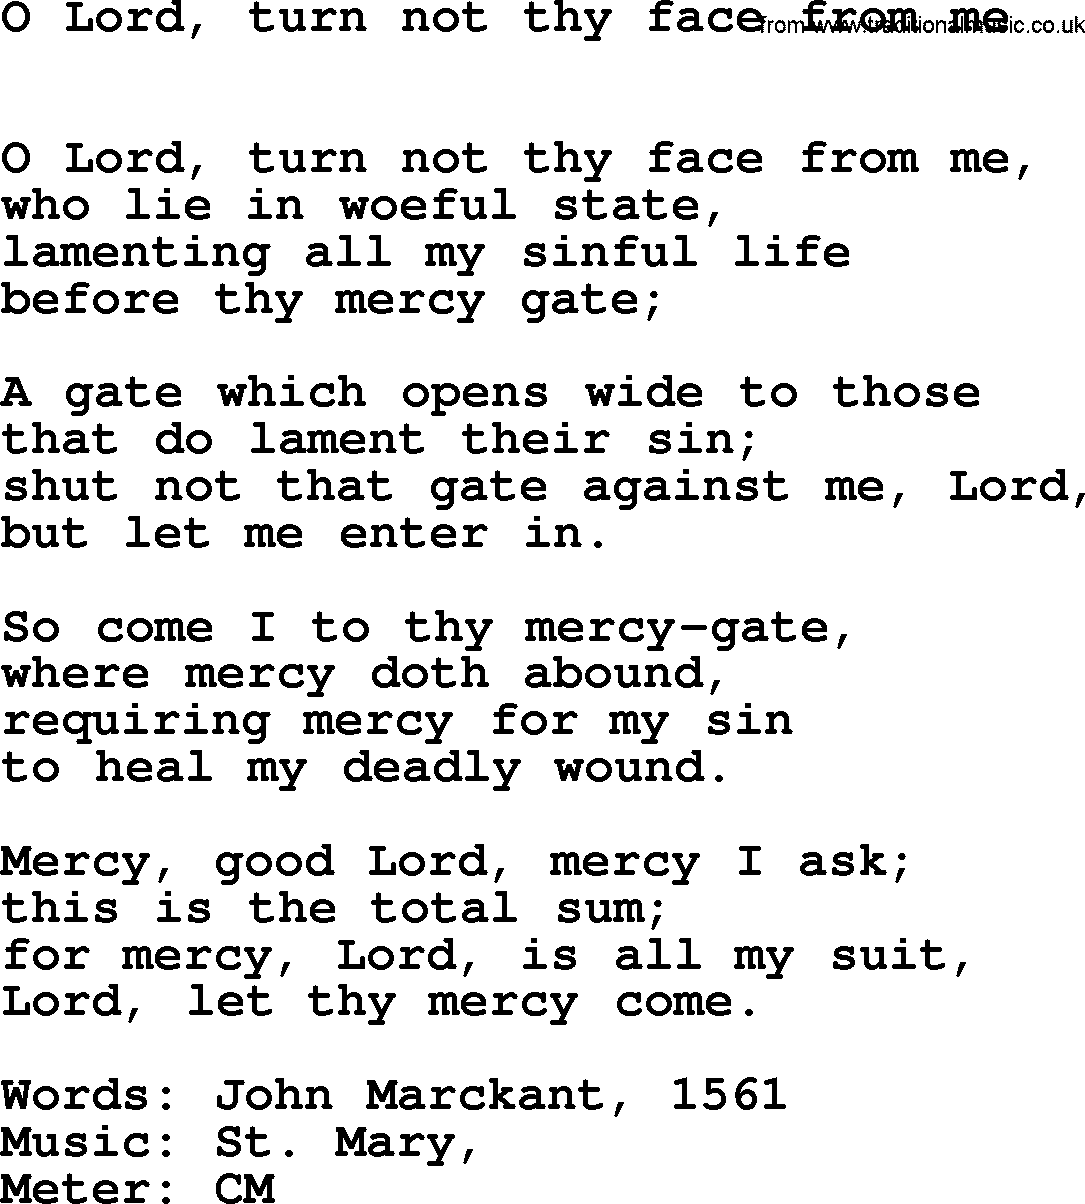 Book of Common Praise Hymn: O Lord, Turn Not Thy Face From Me.txt lyrics with midi music